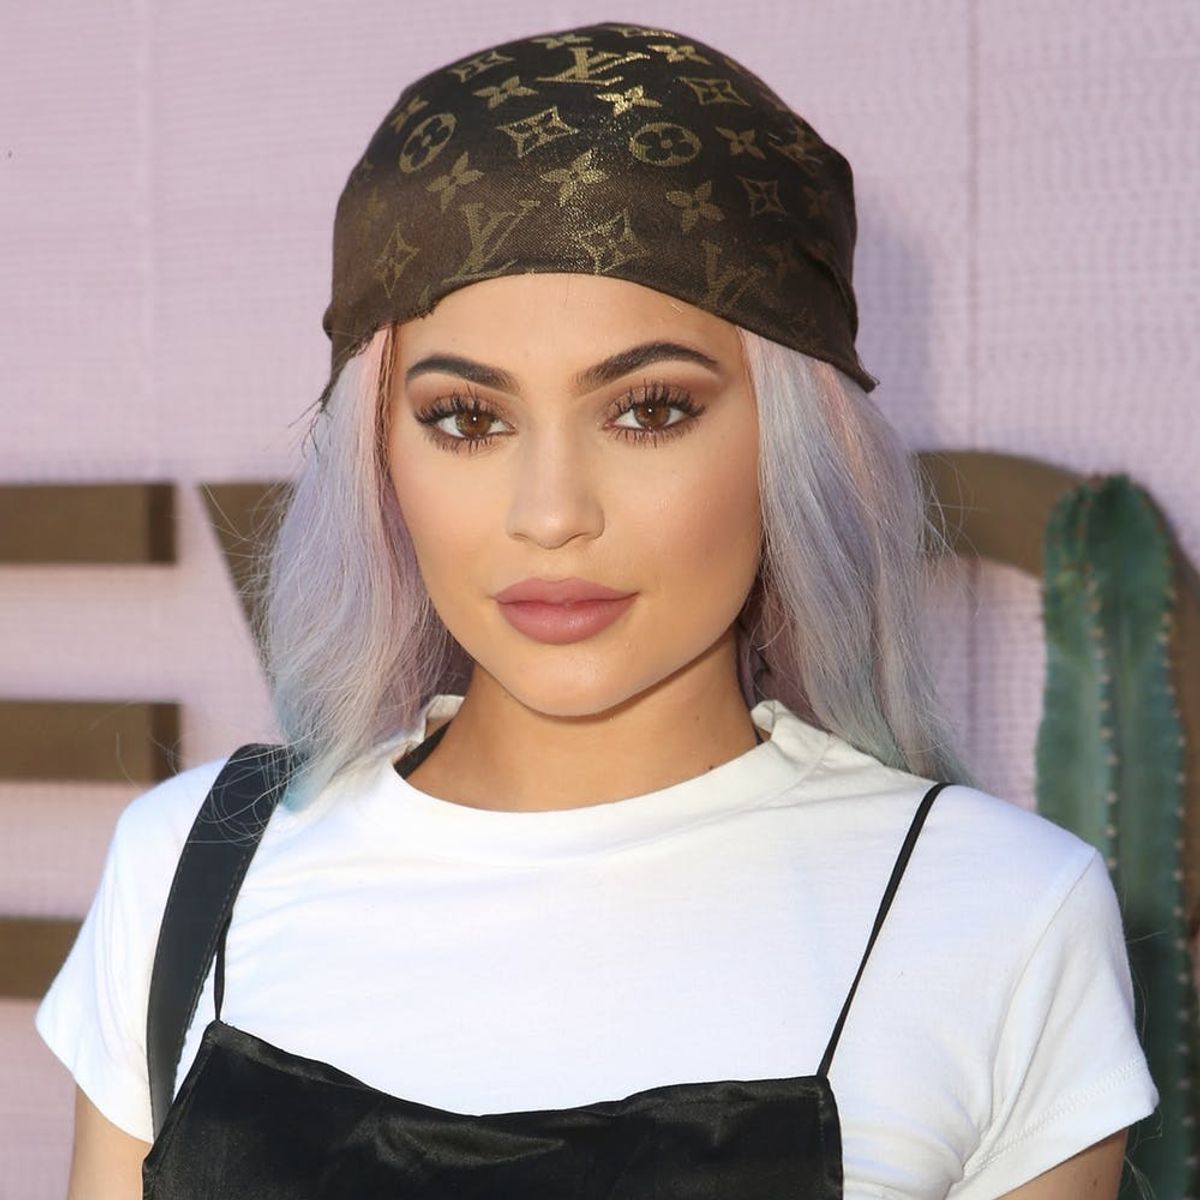 Kylie Jenner’s Latest Makeup-Free Selfie Revealed This Surprising Feature